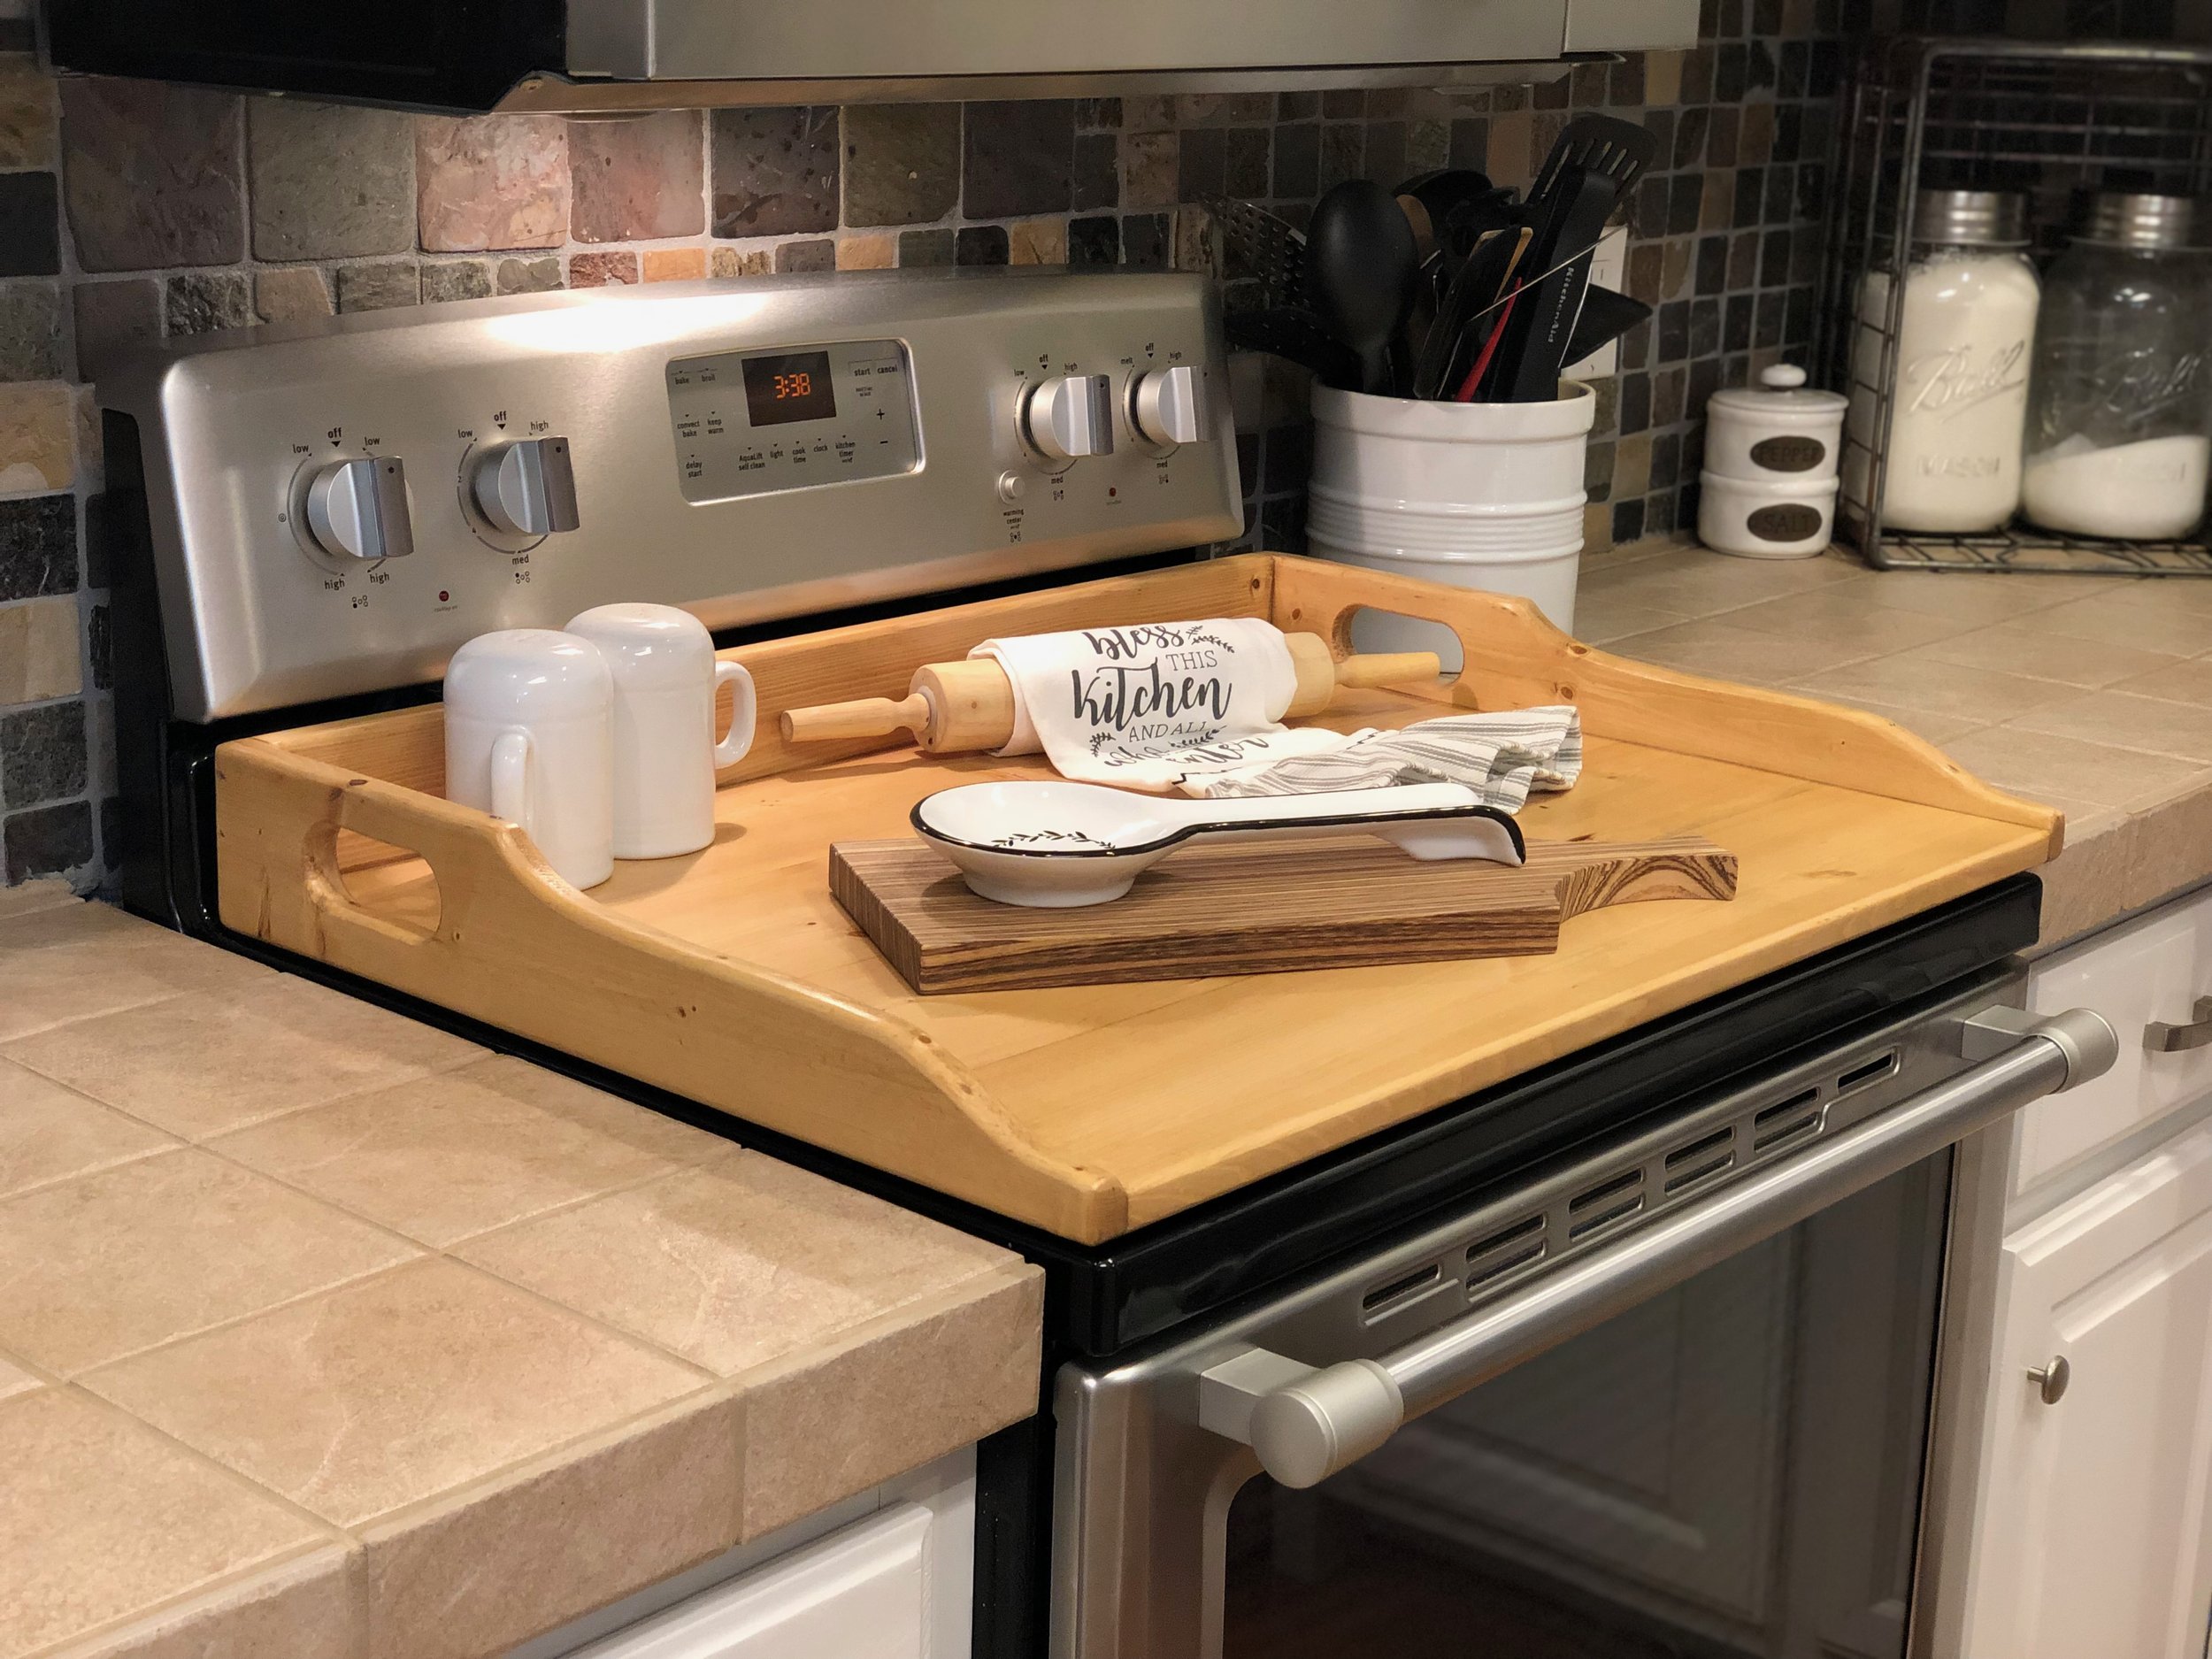  Wooden Stove Top Covers